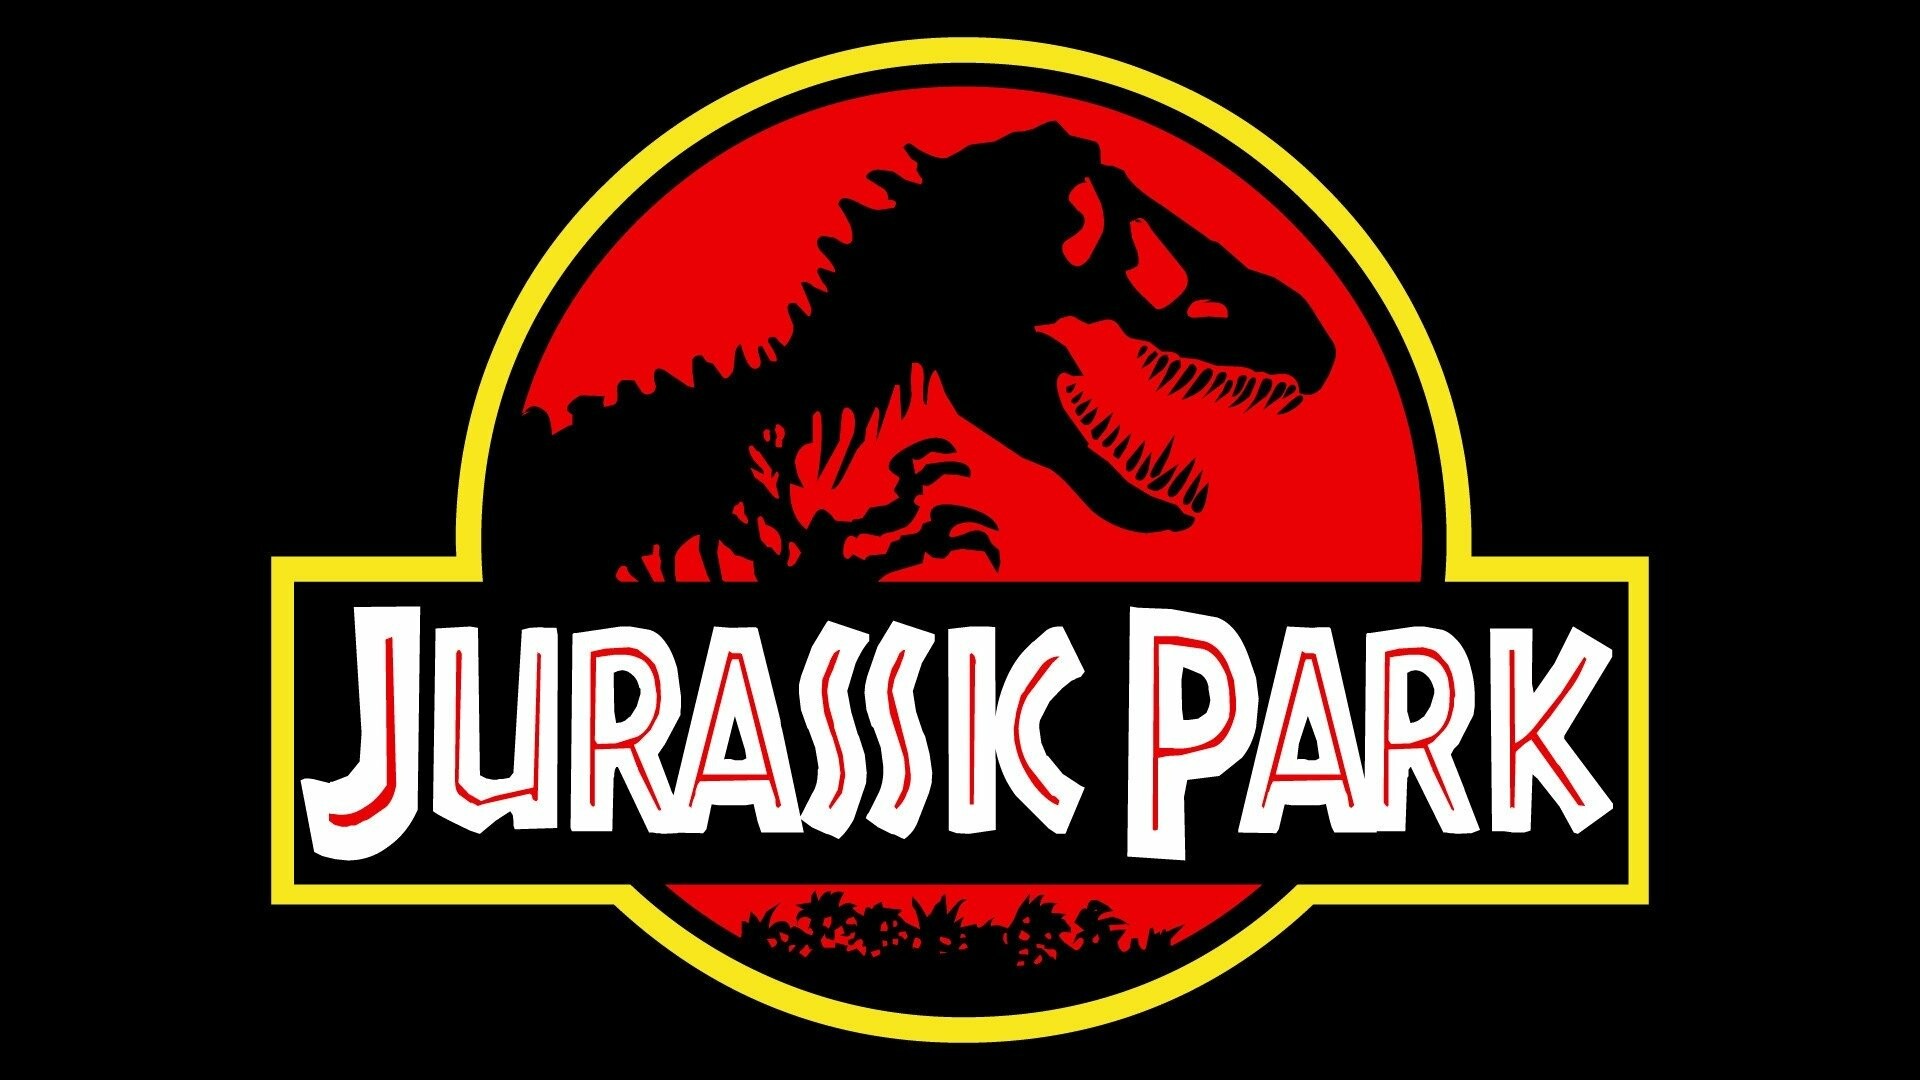 Jurassic Park: The film was premiered on June 9, 1993, at the Uptown Theater in Washington, D.C.. 1920x1080 Full HD Background.